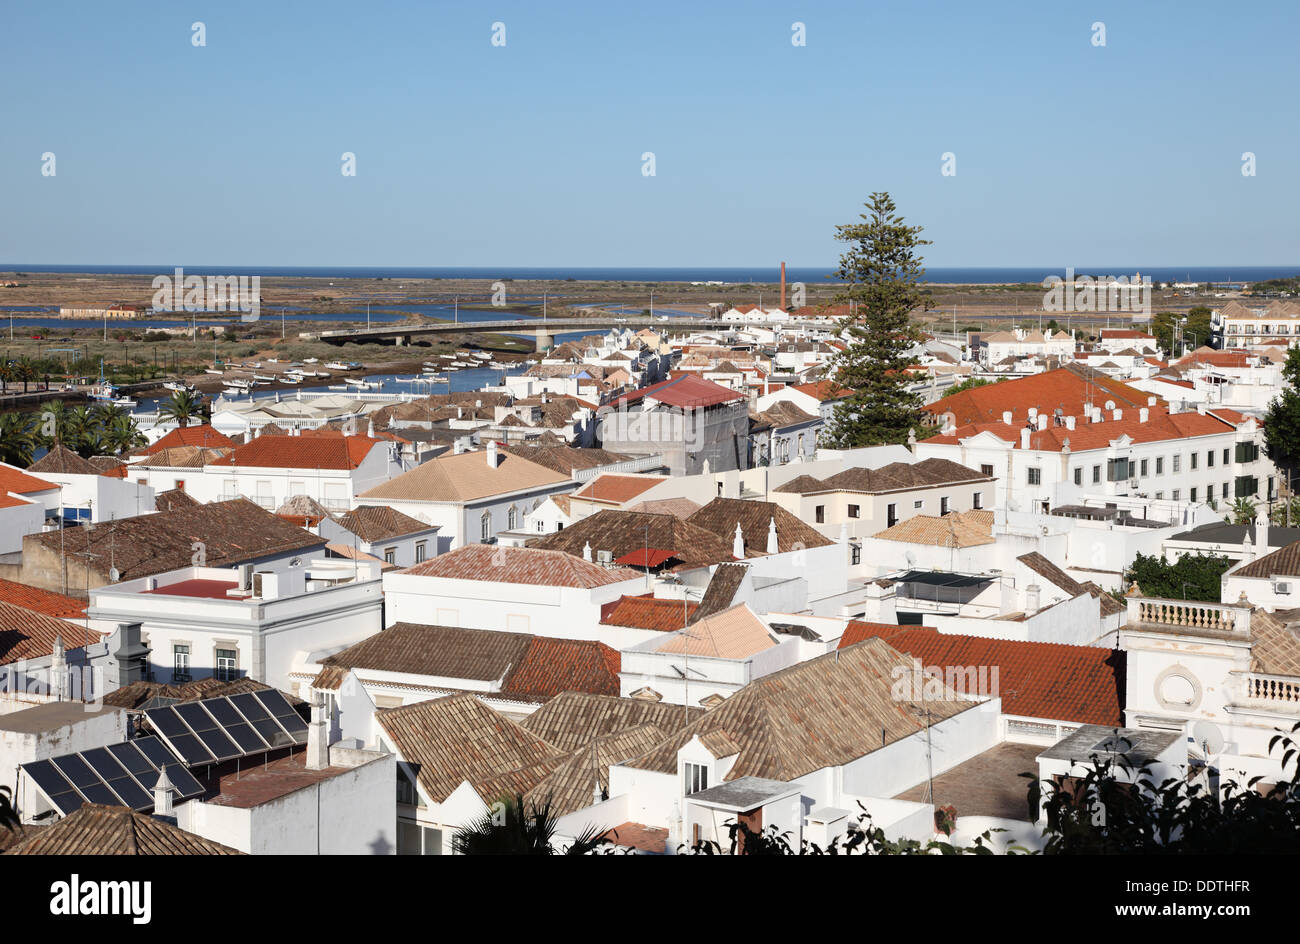 View over the old town of Tavira, Portugal Stock Photo